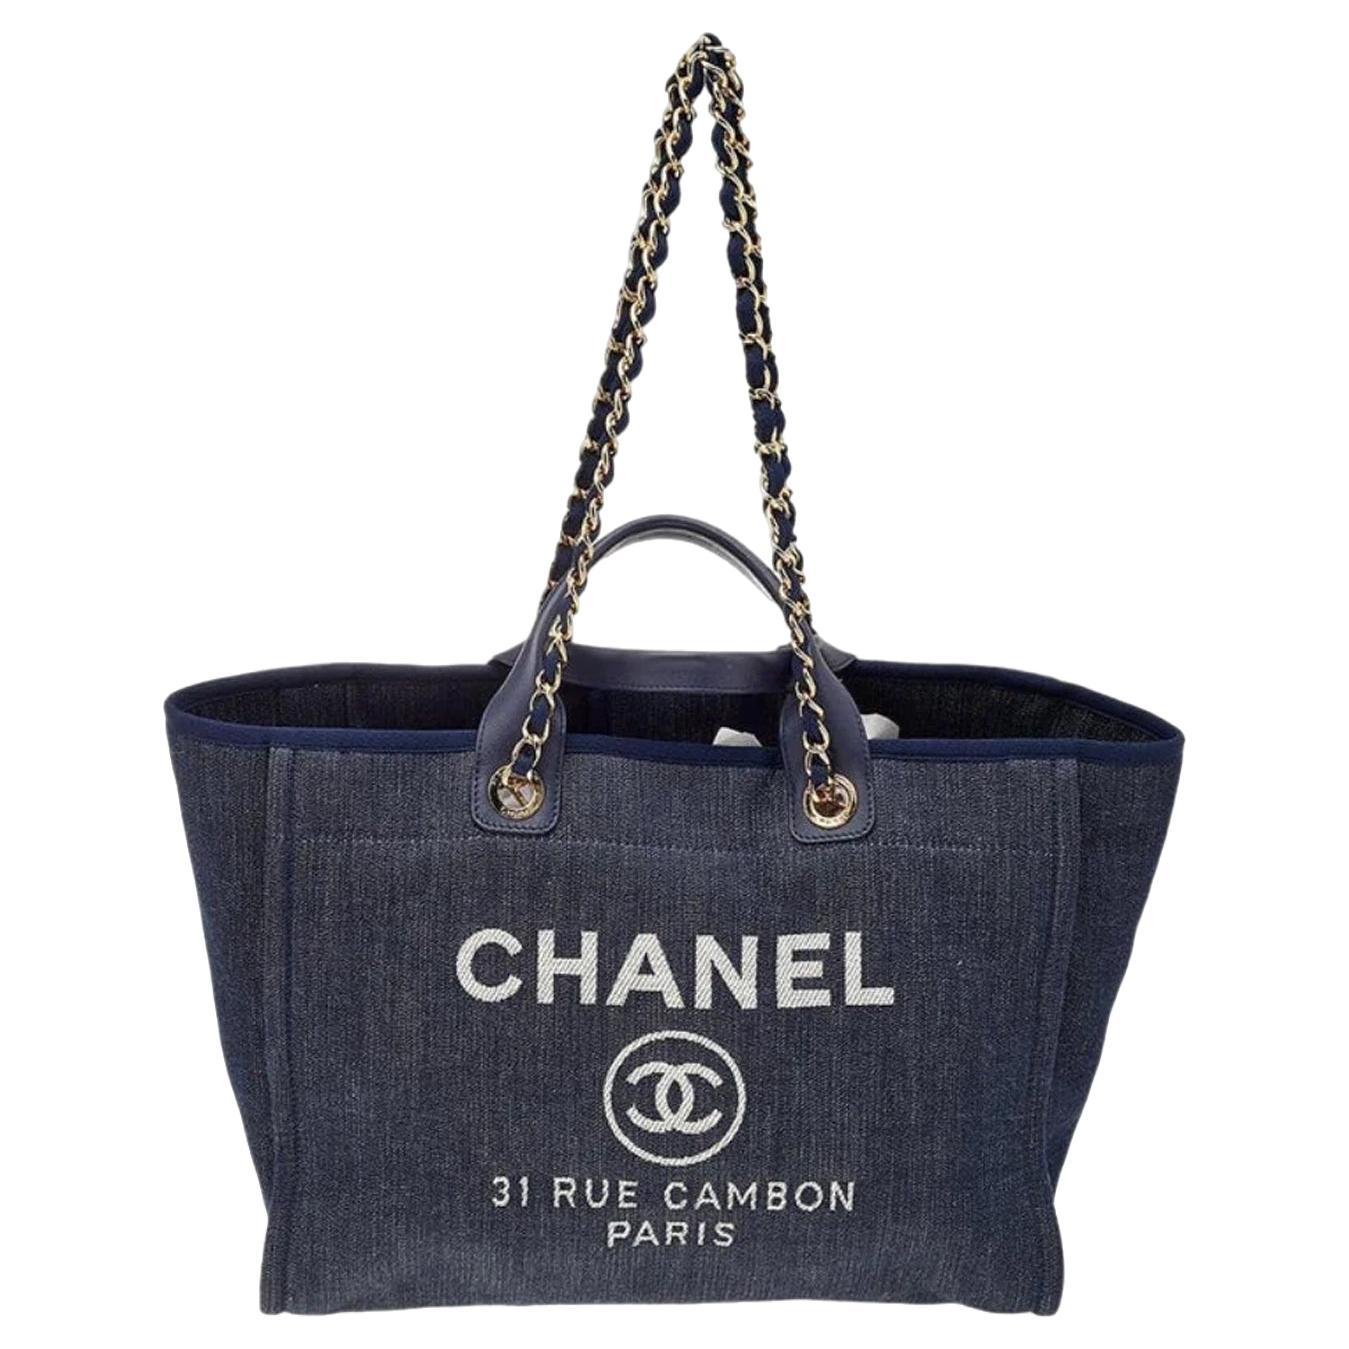 What is a Chanel Deauville?